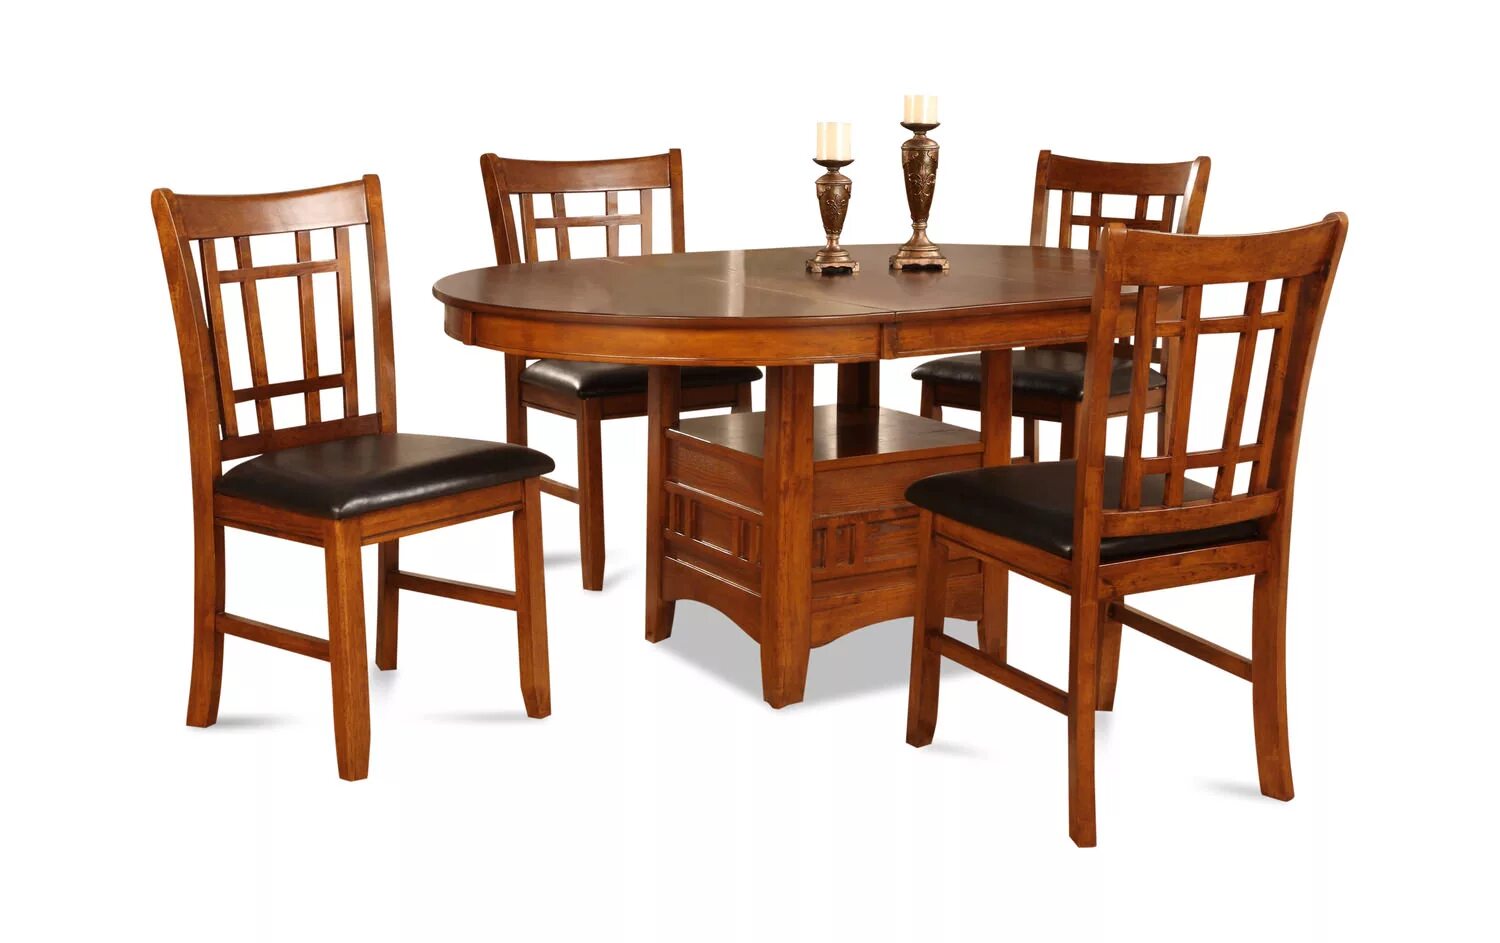 9 4 столиком. Table. Dining Set 4. Chair with Table. Small 4 Chair Dining Set.